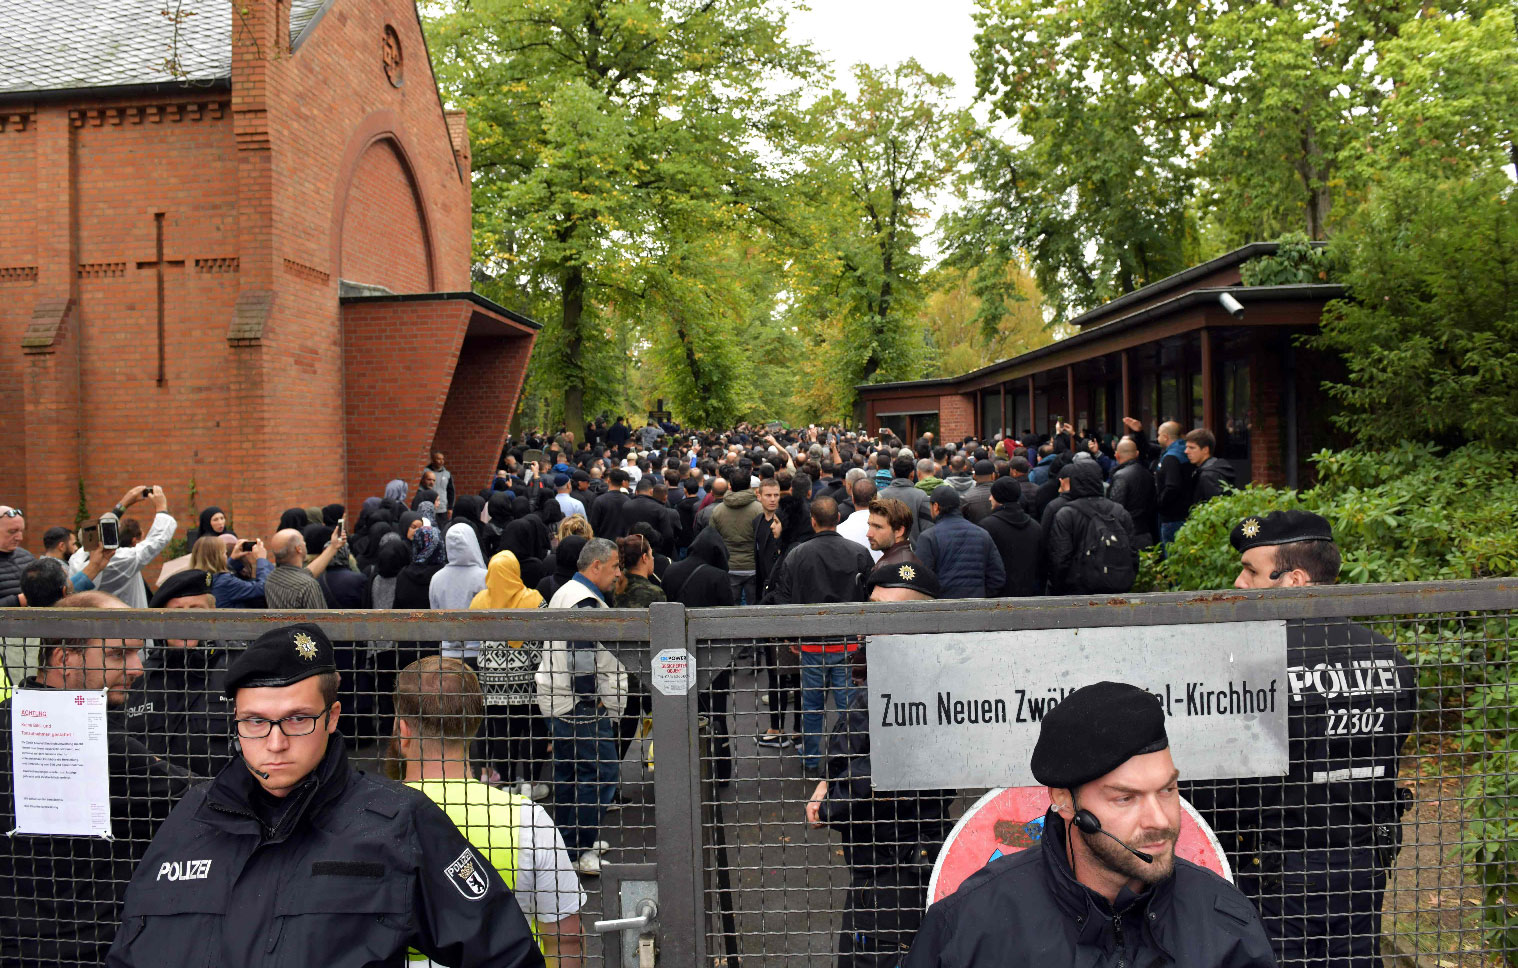 Police secure the area outside the New Twelve Apostle Churchyard where the funeral of shot multiple offender Nidal Rabih takes place in Berlin, on September 13, 2018.